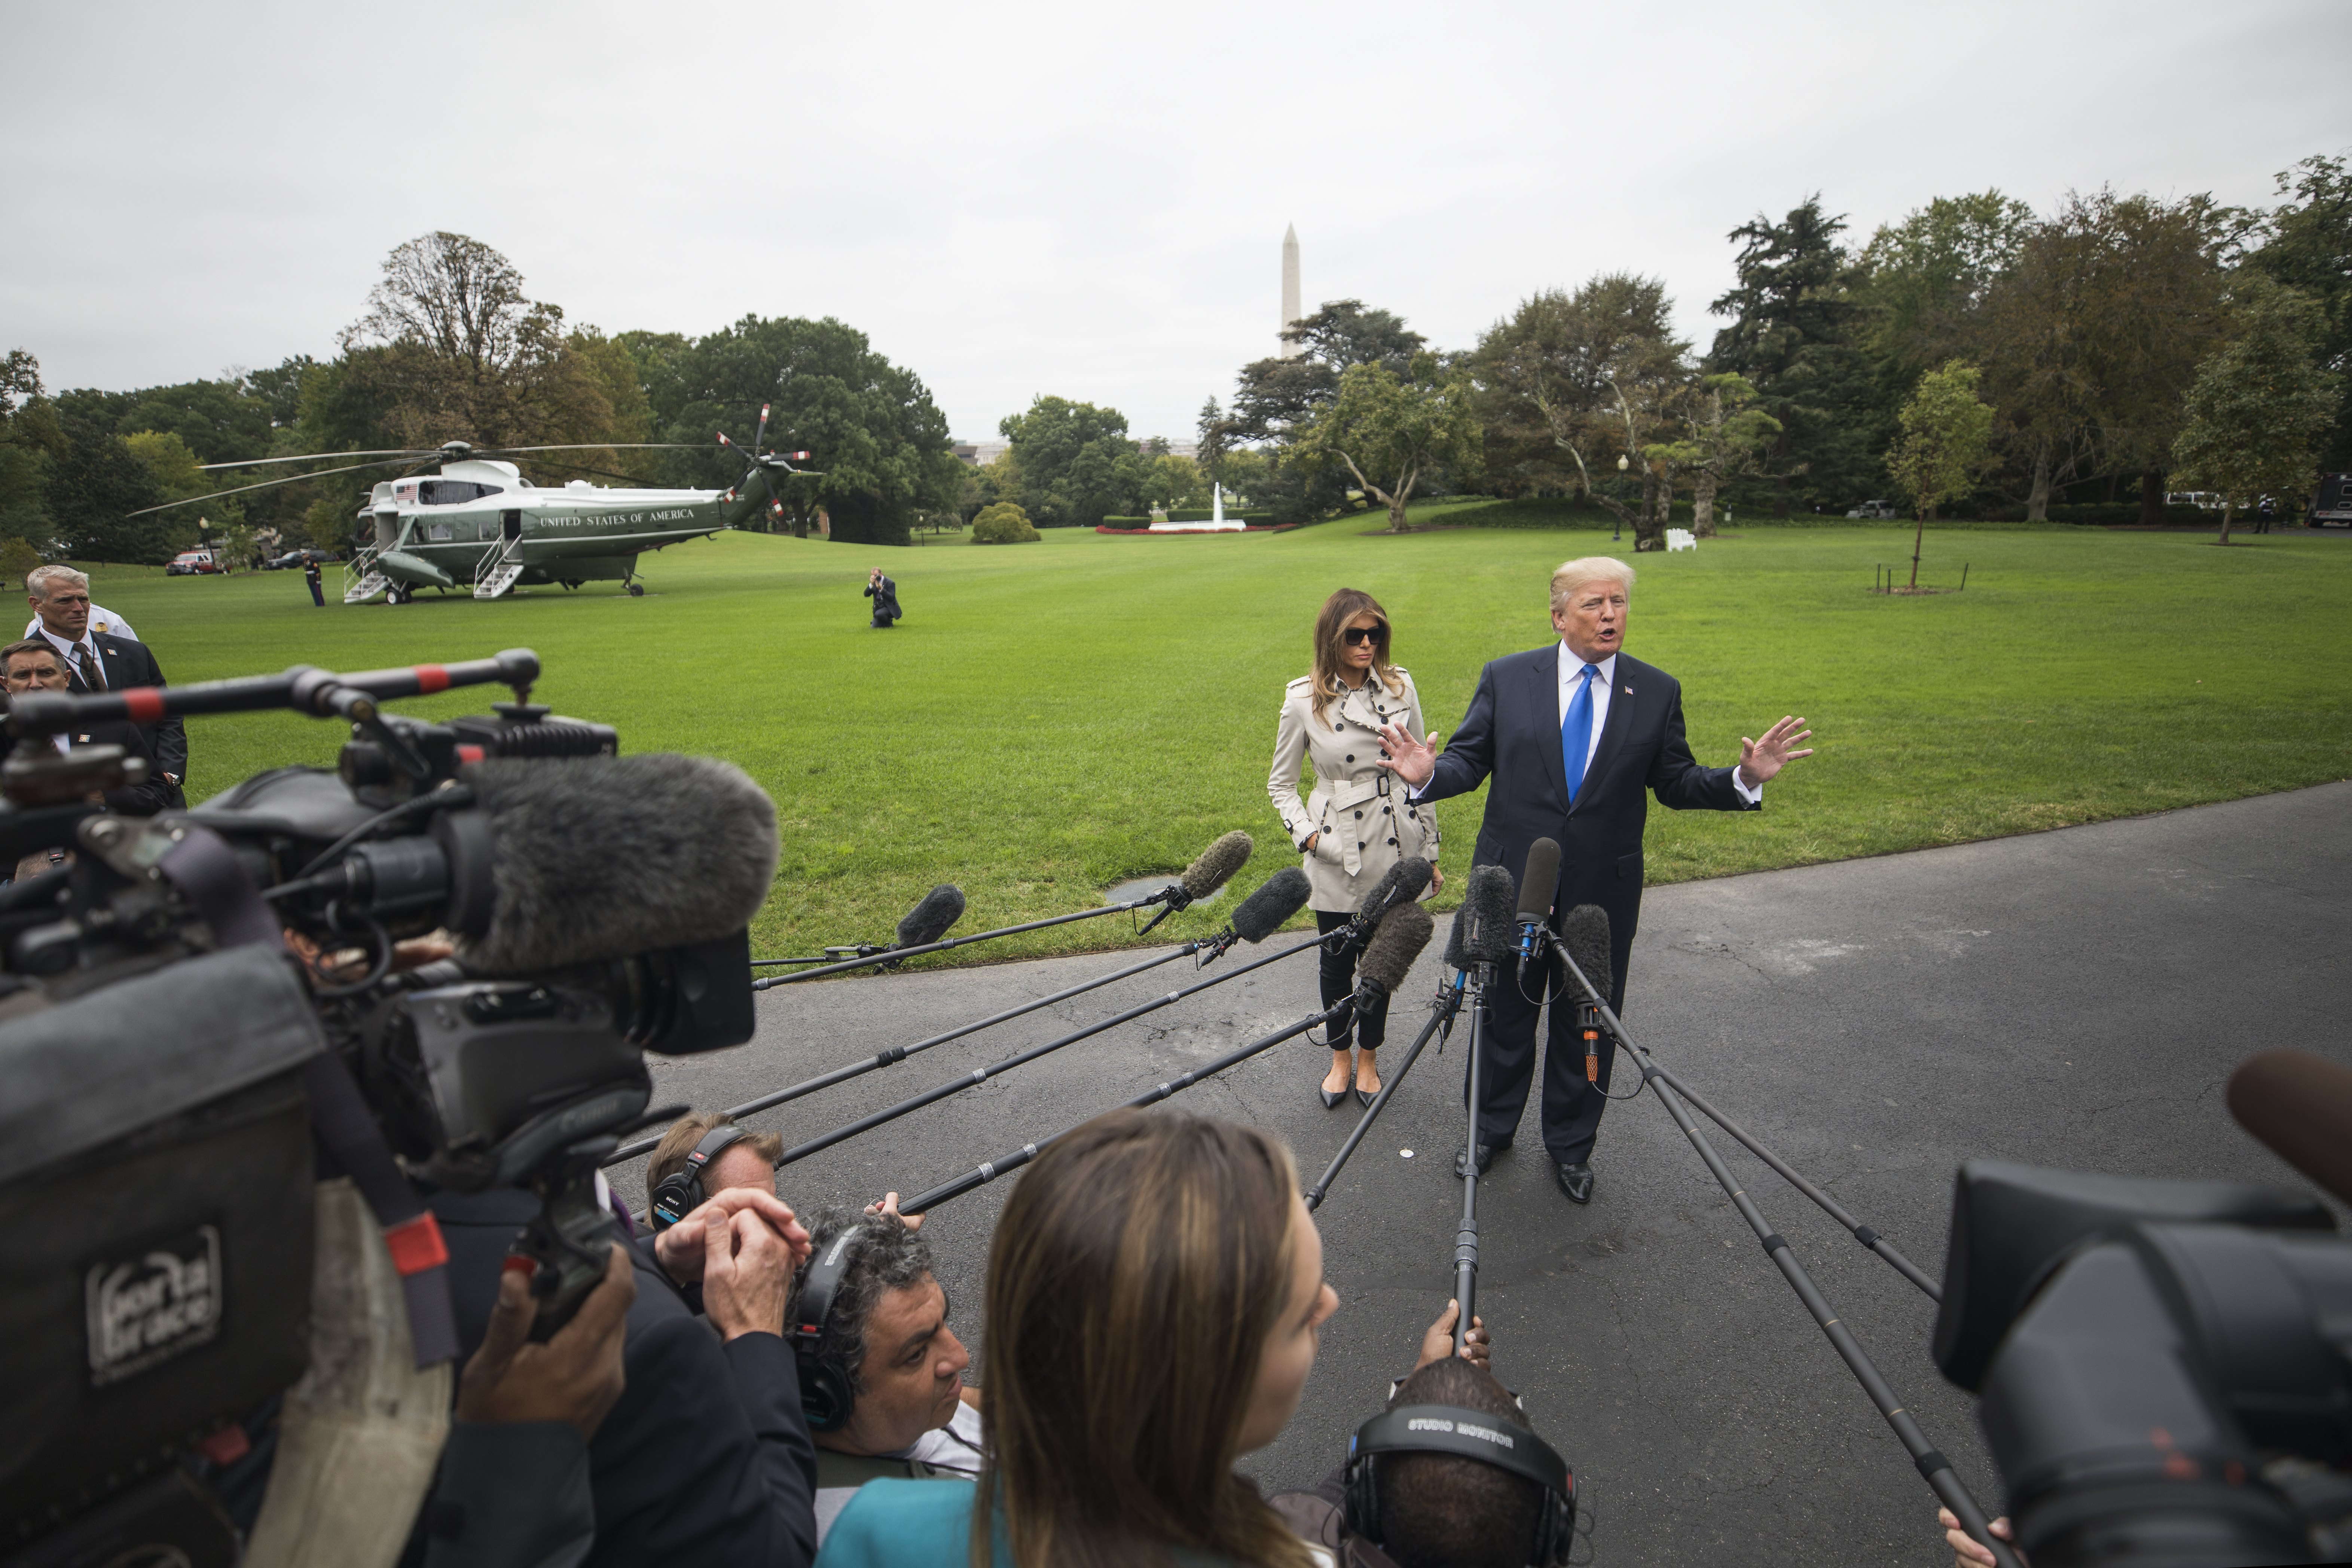 2017-10-13 13:47:43 epa06264042 US President Donald J. Trump answers reporter's questions about his decision to withdraw presidential certification of the Iran nuclear deal, as well about his moves to dismantle Obamacare, as the President departs for the United States Secret Service James J. Rowley Training Center on the South lawn of the White House in Washington, DC, USA, 13 October 2017, as US First Lady Melania Trump looks on. EPA/JIM LO SCALZO